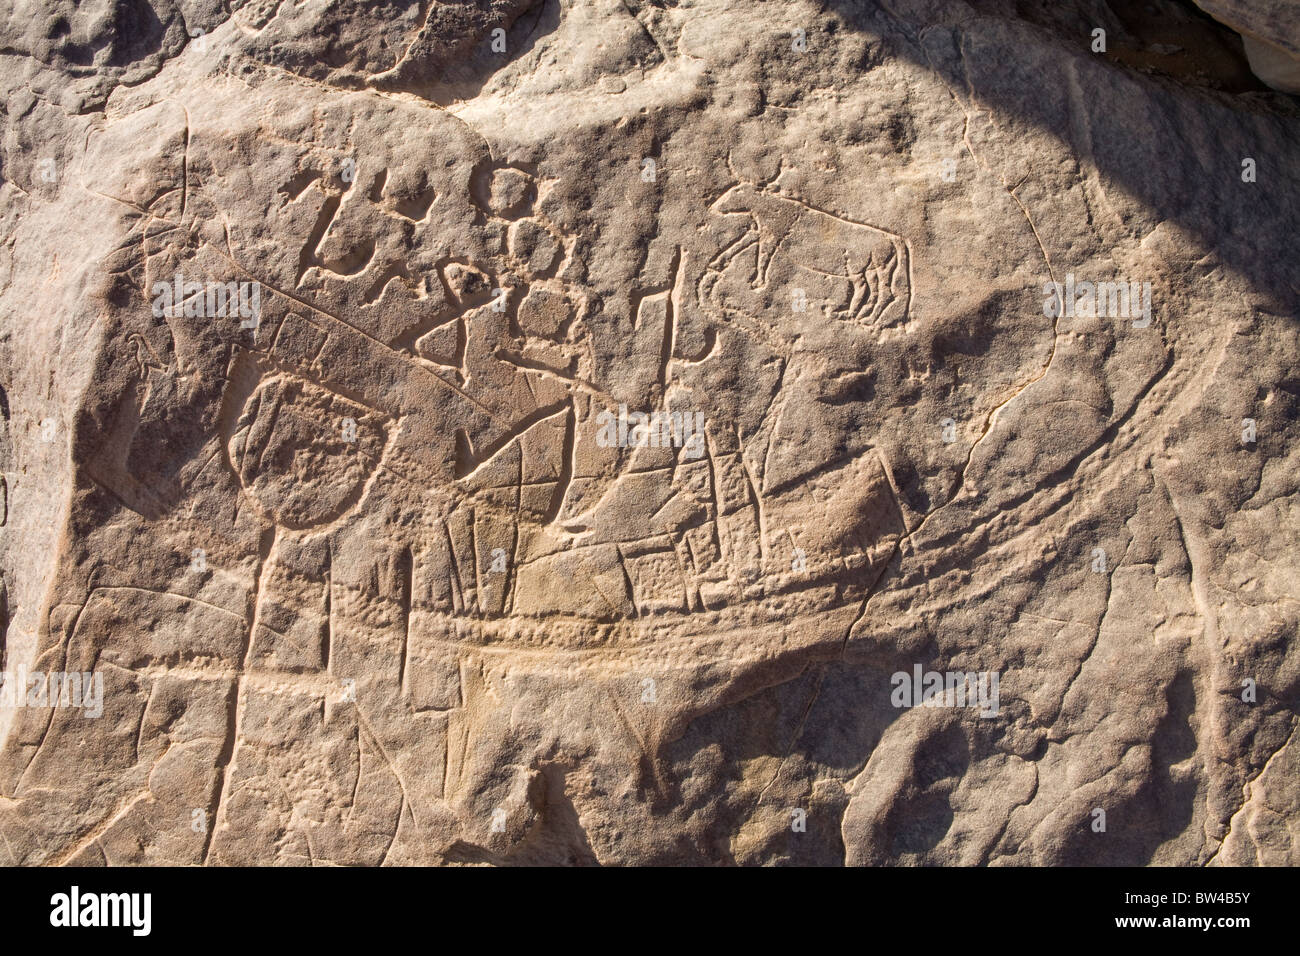 High prowed boat  with Horus on the prow and bovid attached etched on rock-face in Wadi Mineh, Eastern Desert of Egypt Stock Photo